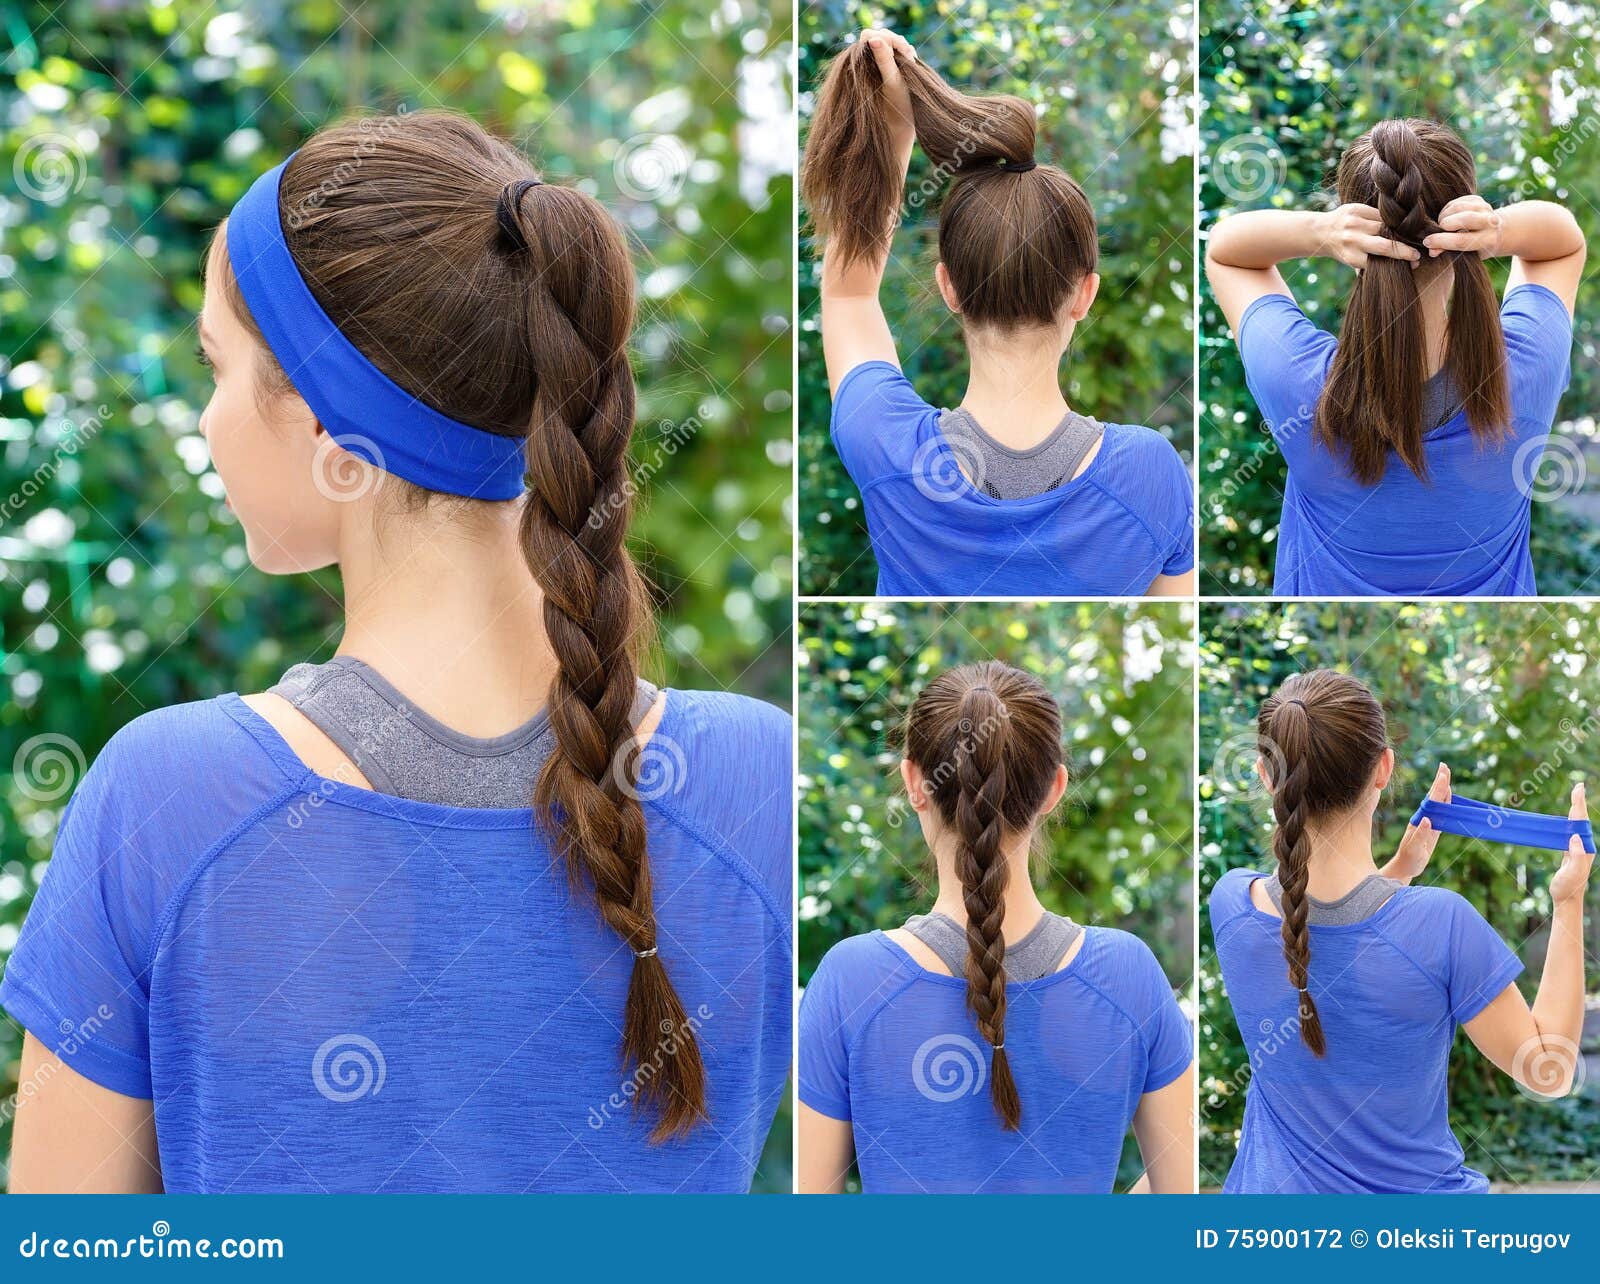 Hairstyle braid for sports stock photo. Image of fitness - 75900172